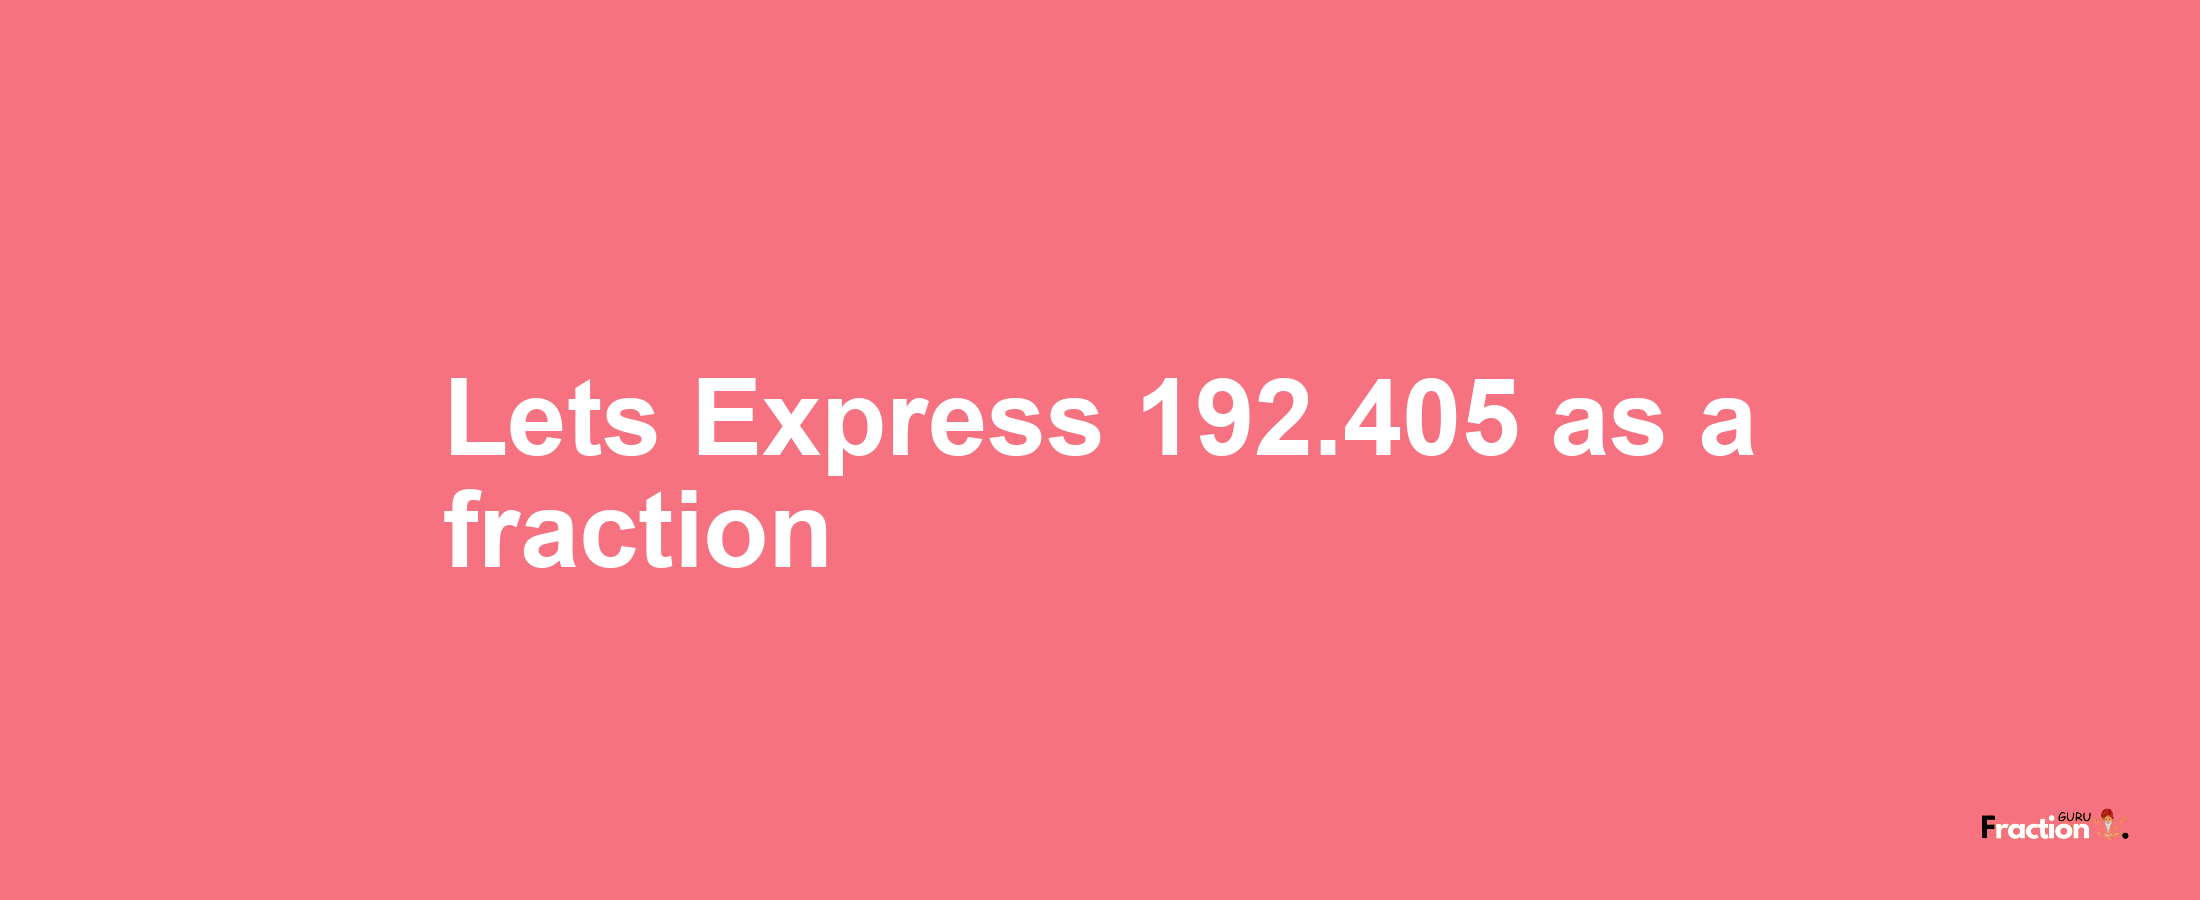 Lets Express 192.405 as afraction